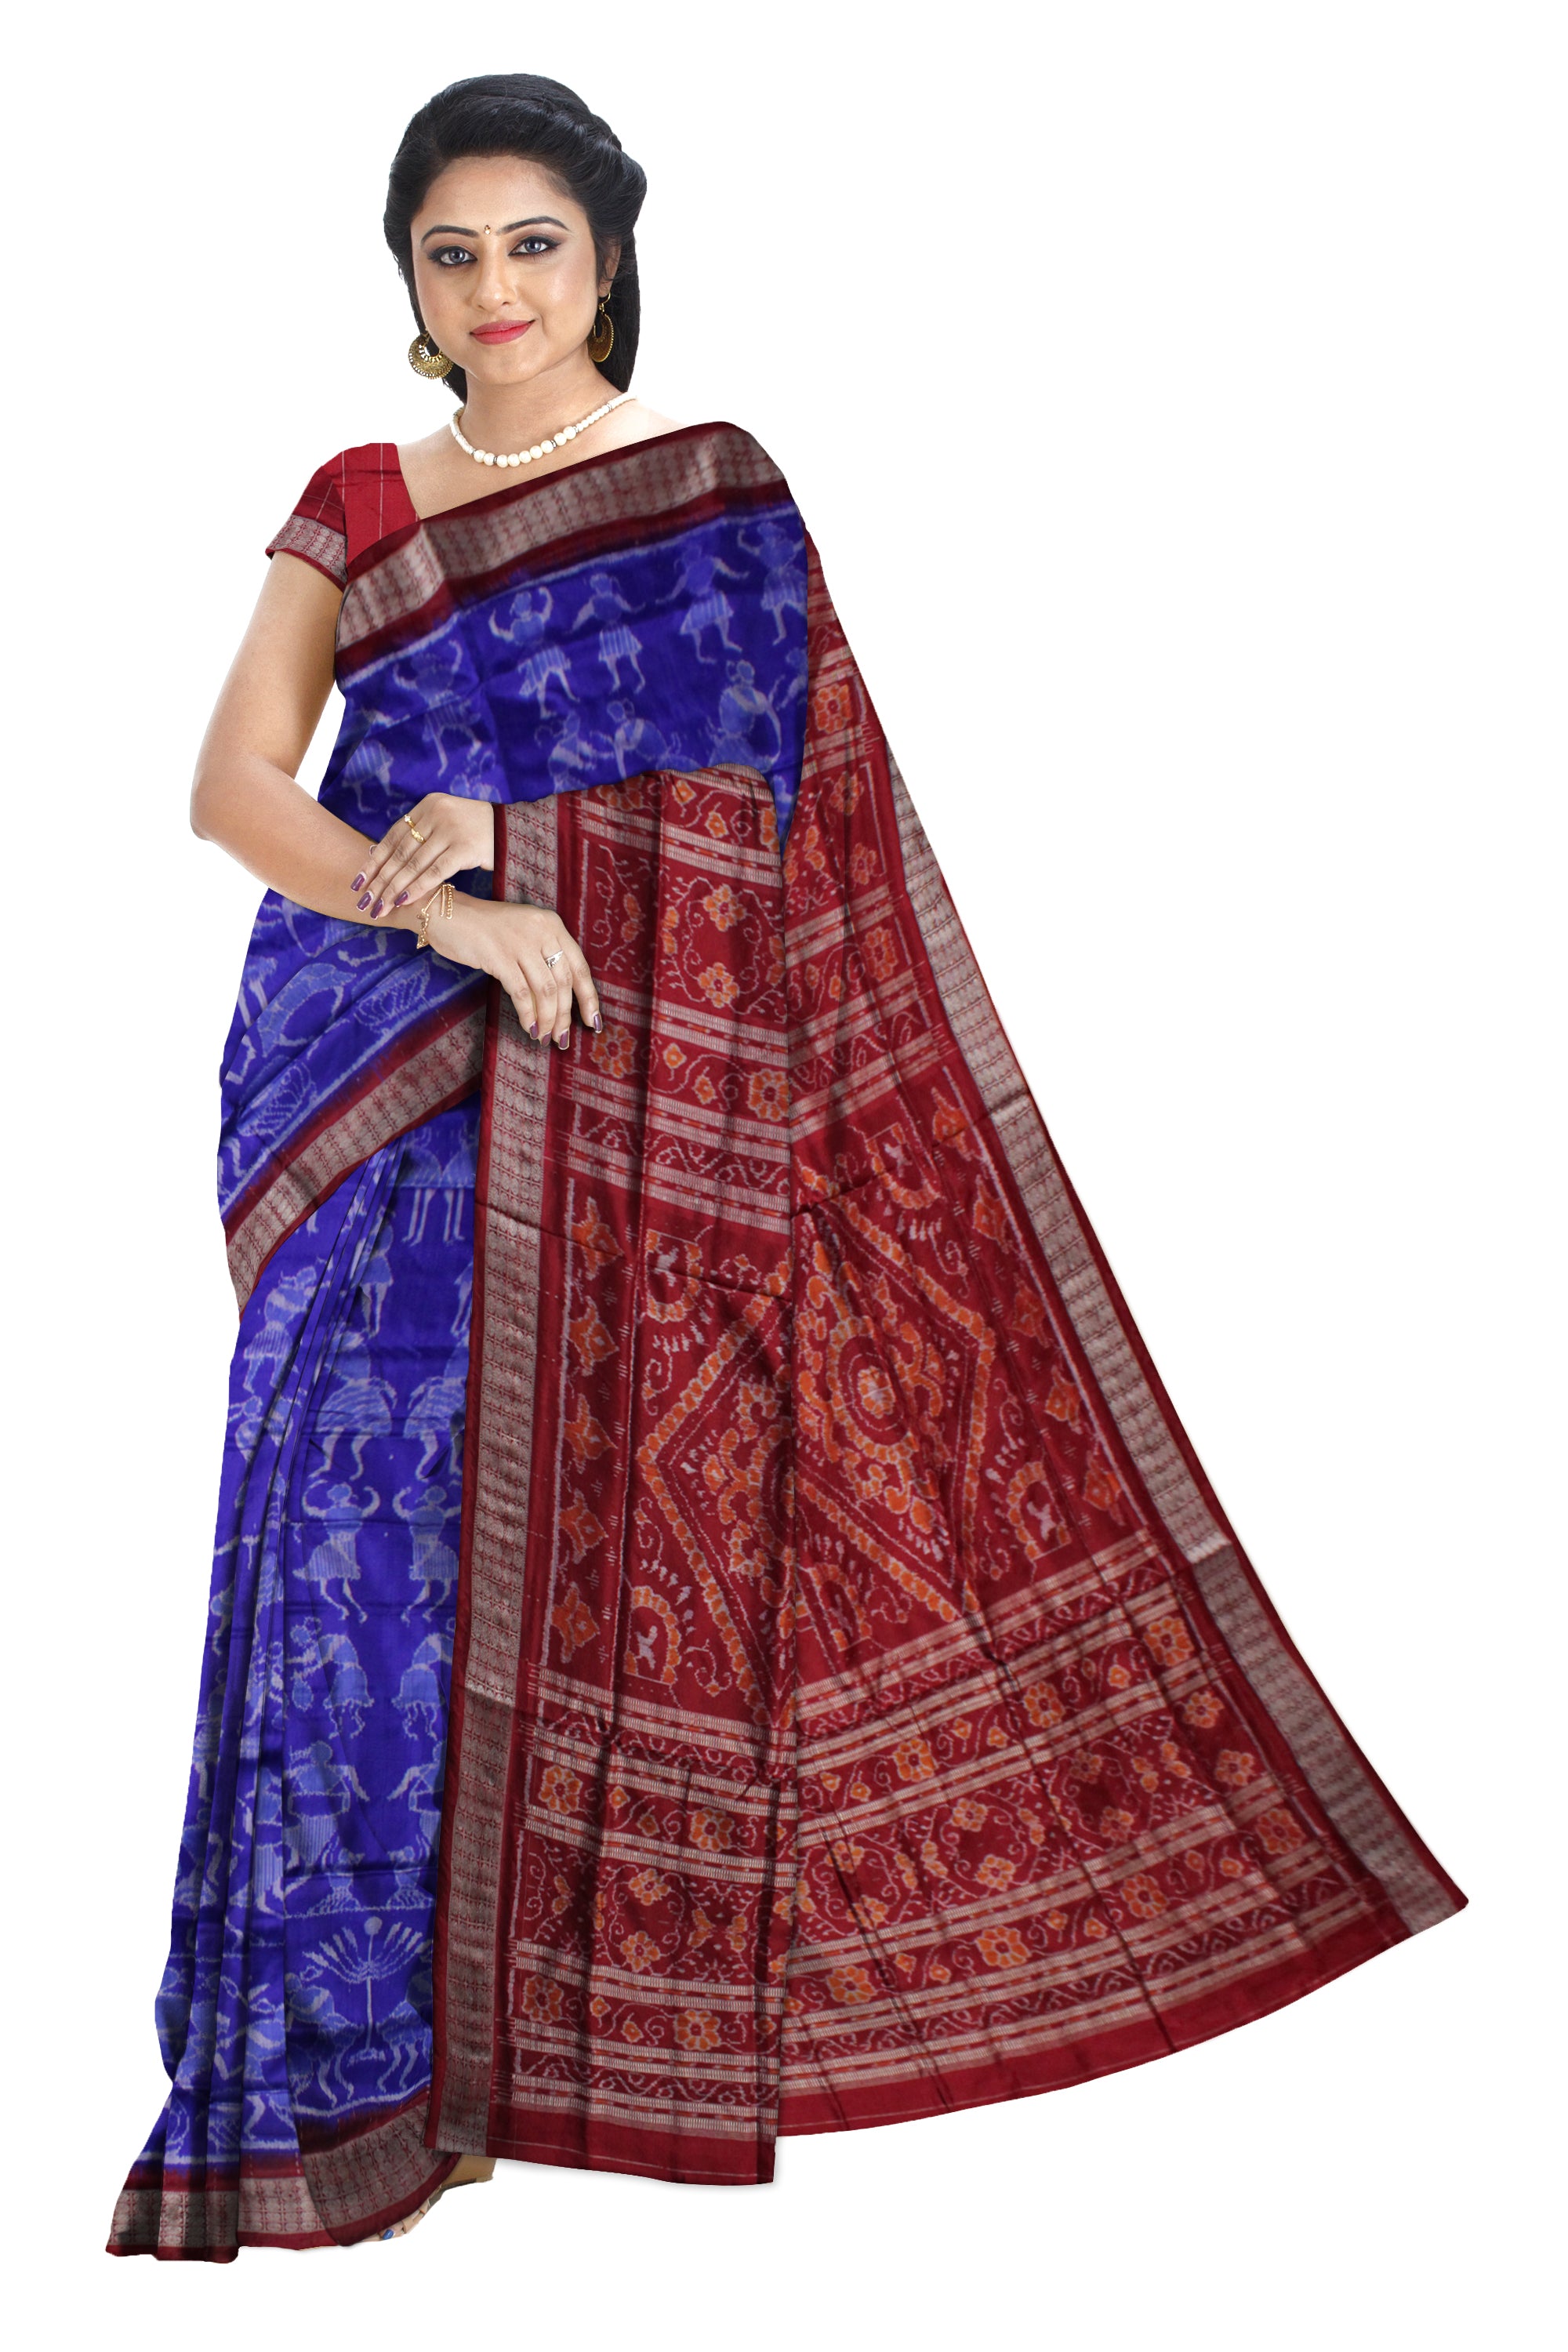 LATEST BLUE AND MAROON COLOR TRIBAL DANCE PATTERN PURE SILK SAREE,WITH BLOUSE PIECE. - Koshali Arts & Crafts Enterprise